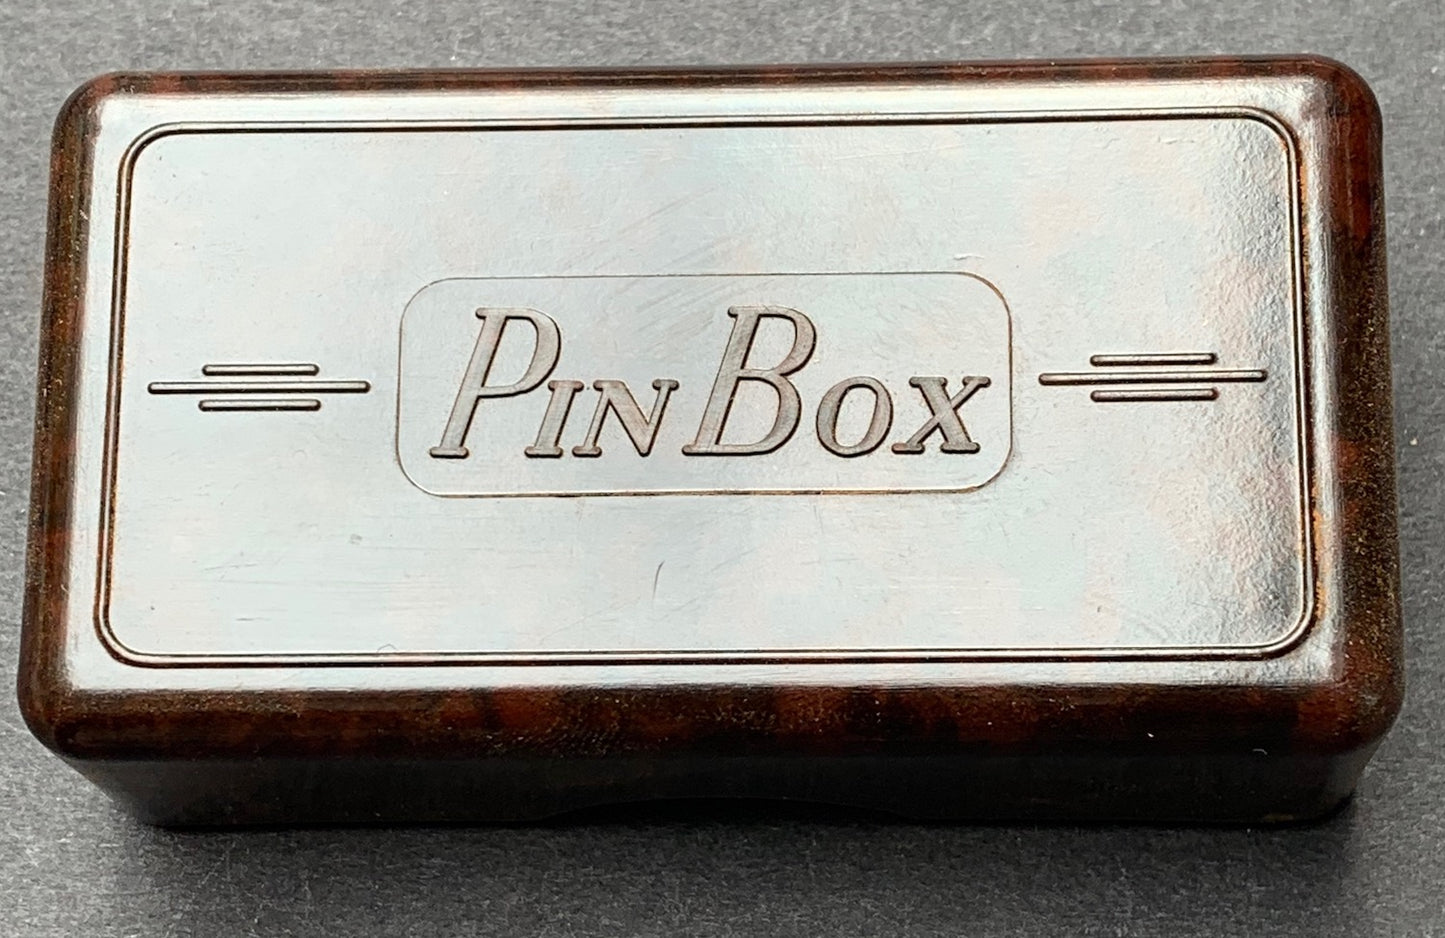 Most Satisfying Deco Bakelite Pin Box Made in England